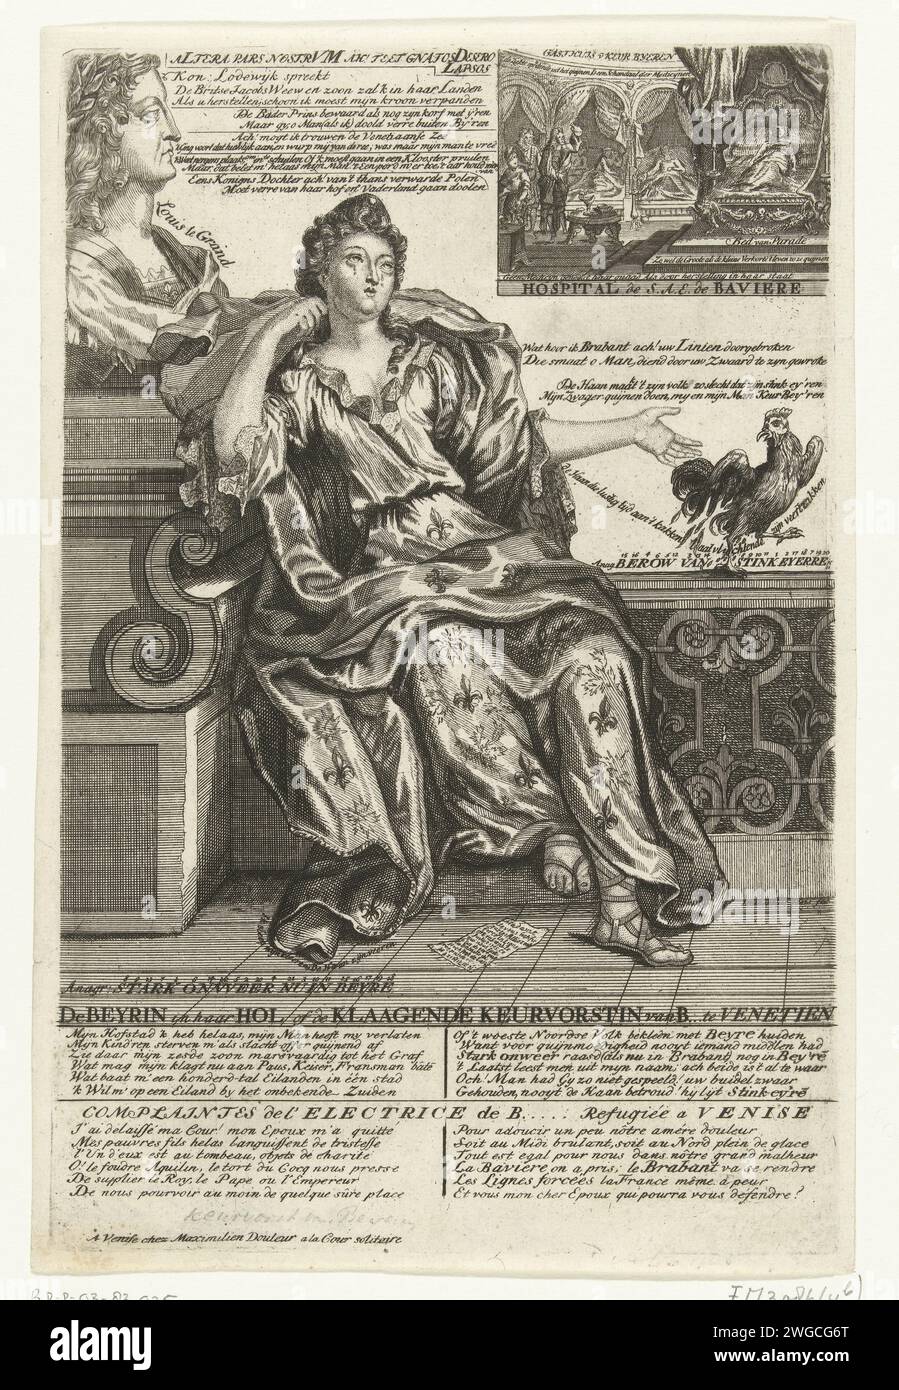 Complaint from the Elector of Bavaria, 1705, 1705 - 1706 print Complaint from Theresia Kunigunde Sobieska, Elector of Bavaria (the wife of Maximilian II Emanuel, Elector of Bavaria), 1705. On the left a large bust of King Louis XIV. Verses in Dutch and French in the record. Part of a series of 7 cartoons on the French and allies from the year 1705. print maker: Northern Netherlandspublisher: Amsterdam paper etching political caricatures and satires Venice Stock Photo